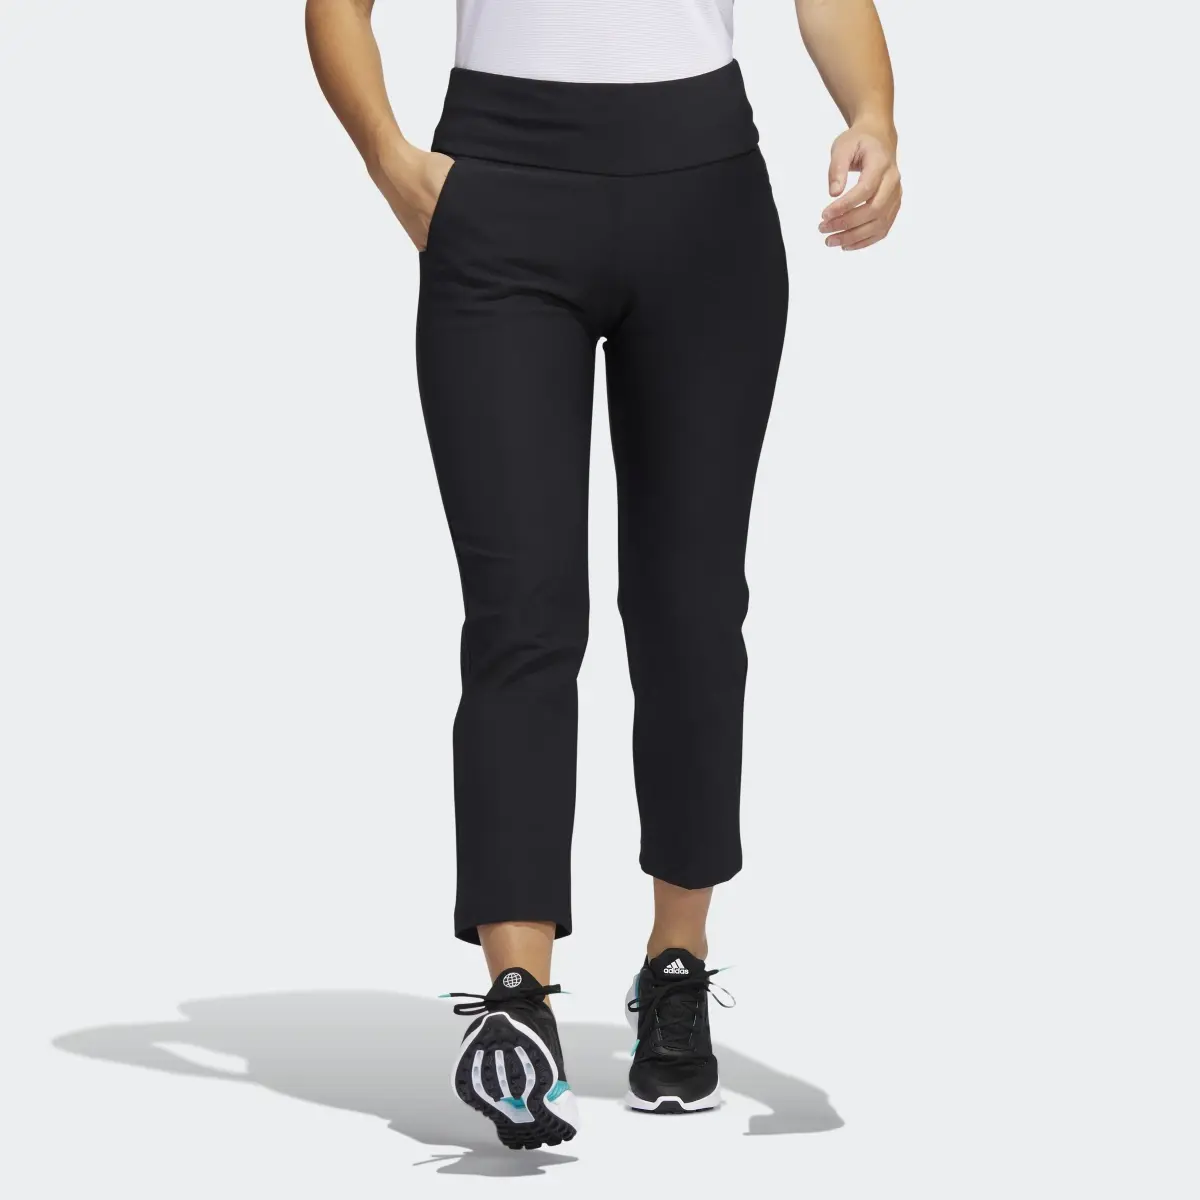 Adidas Pull-On Ankle Pull-On Ankle Golf Pants. 1